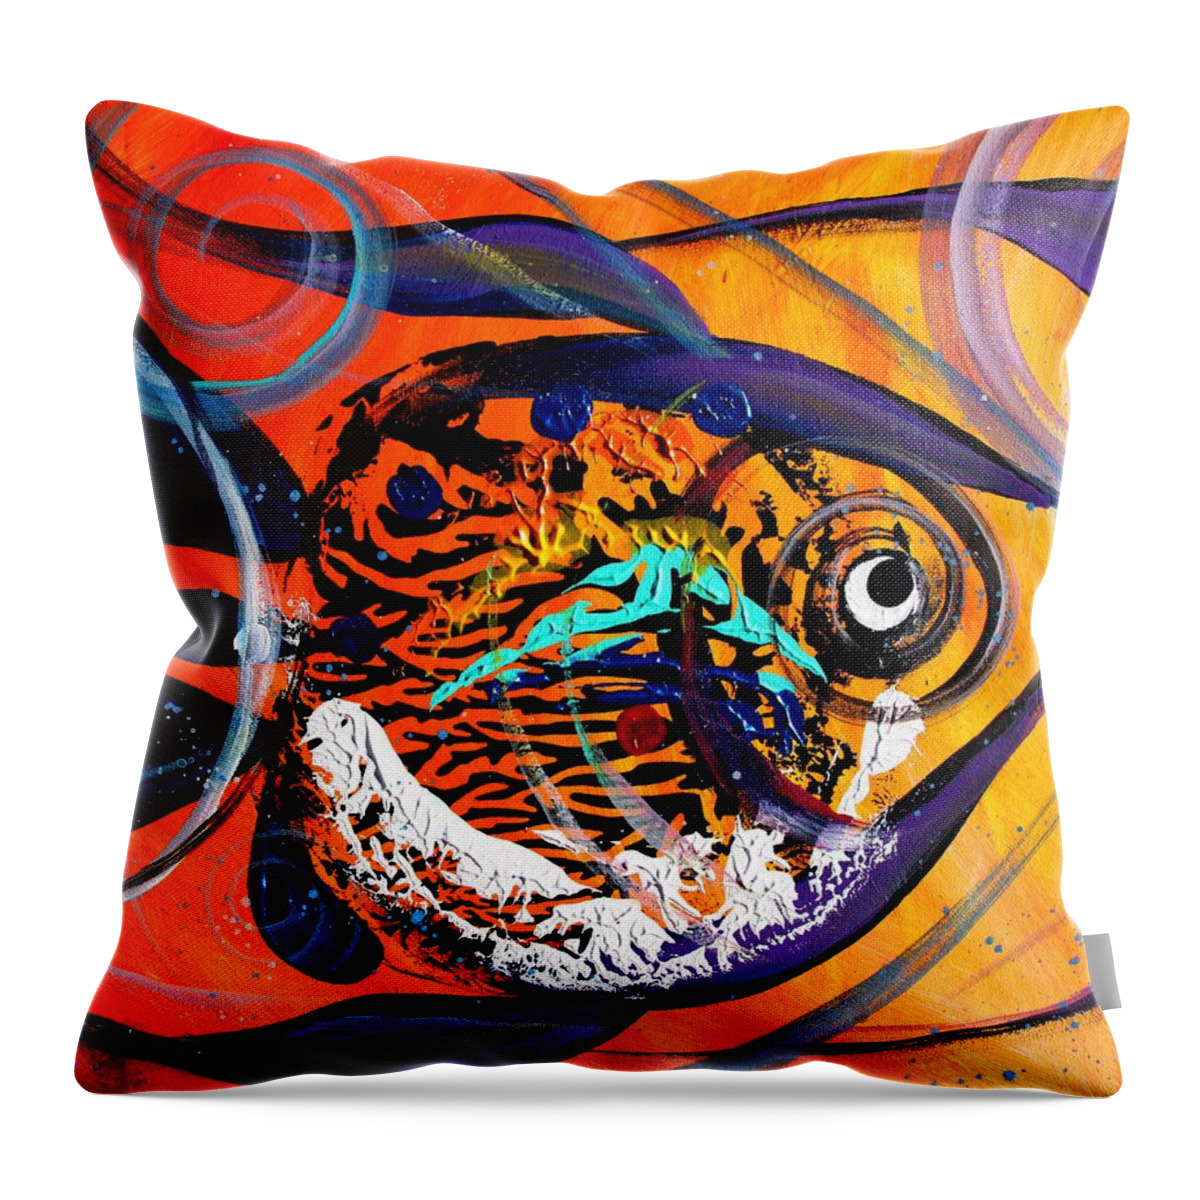 Fish Throw Pillow featuring the painting Arizona Fish by J Vincent Scarpace